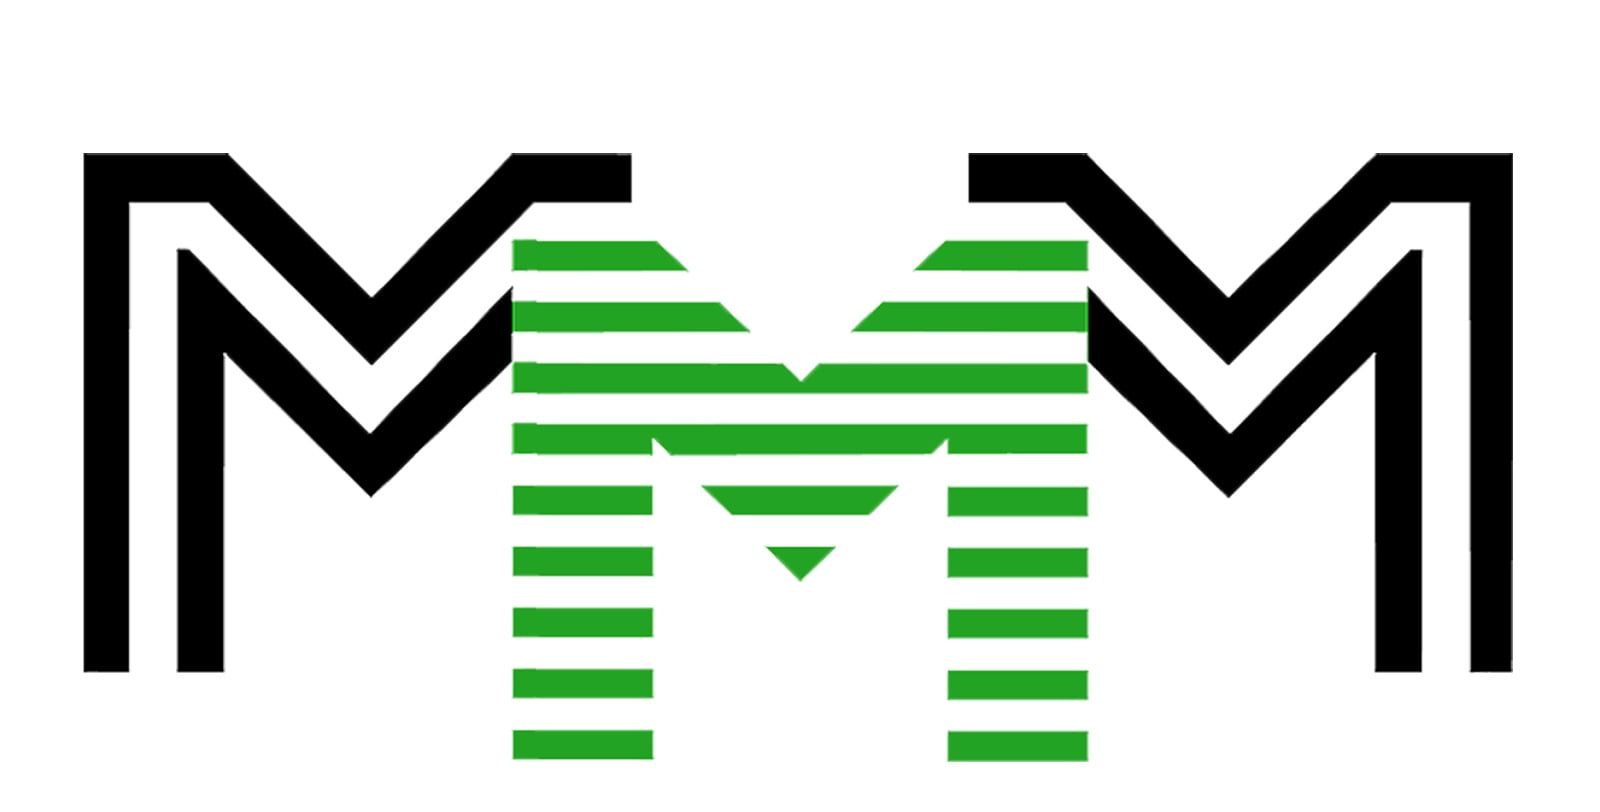 About MMM in Nigeria